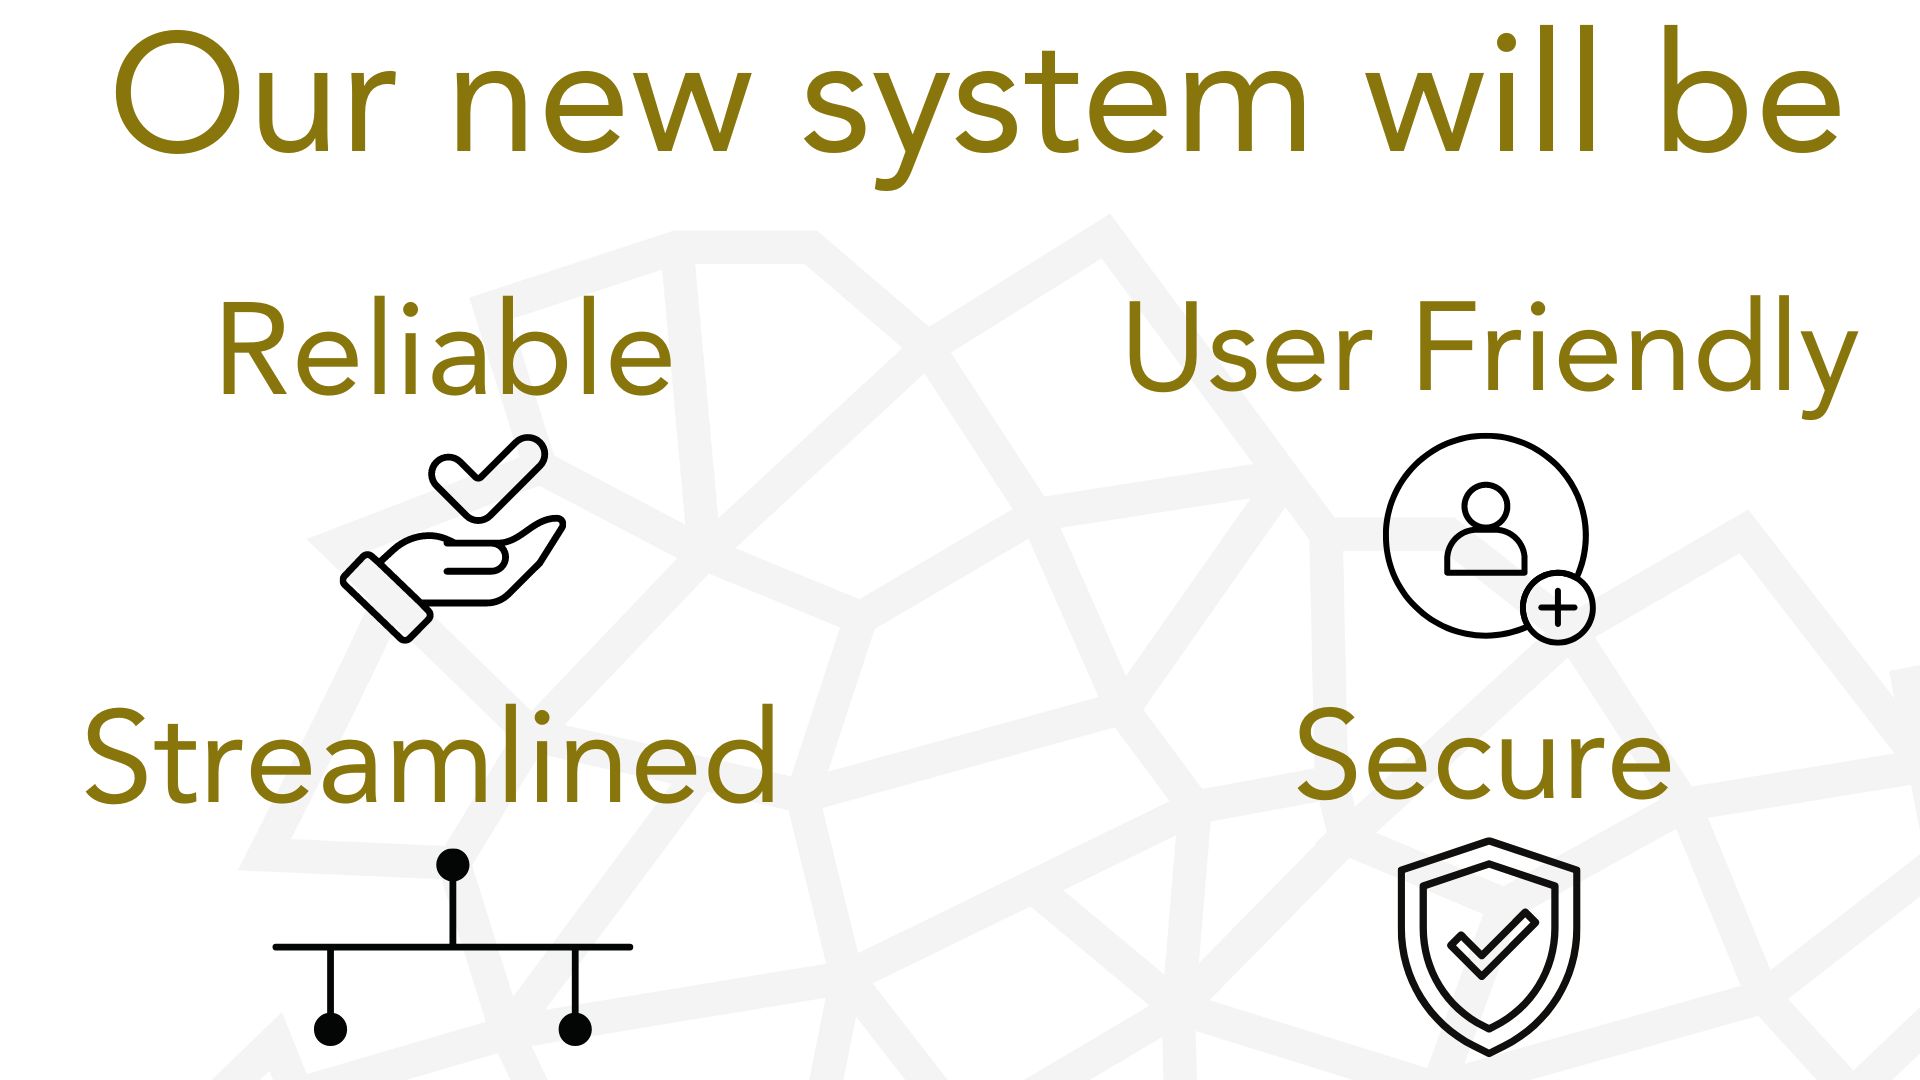 Our new system will be reliable, user friendly, secure, streamlined with graphics and ACFID webbing